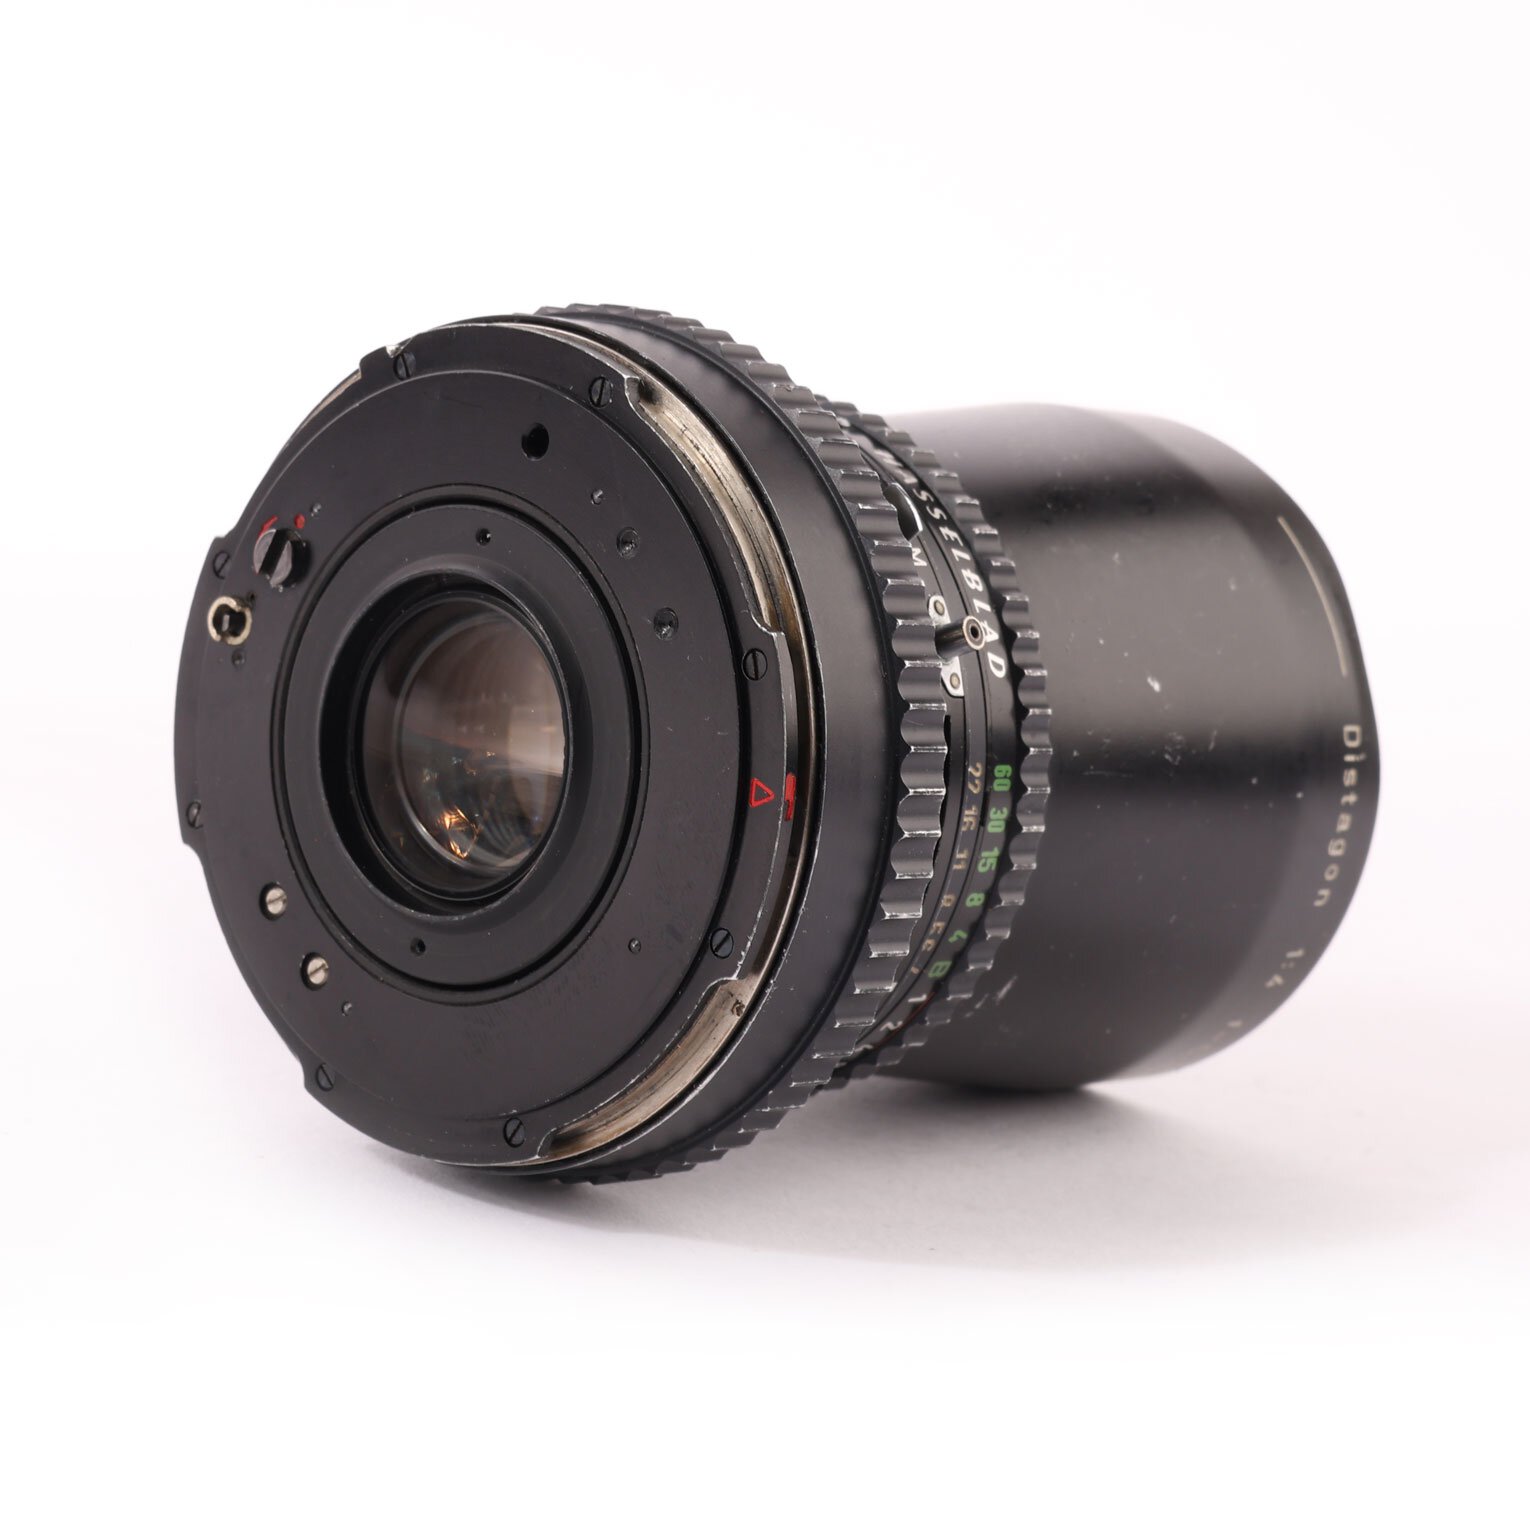 Zeiss Distagon 4/50mm Hasselblad V